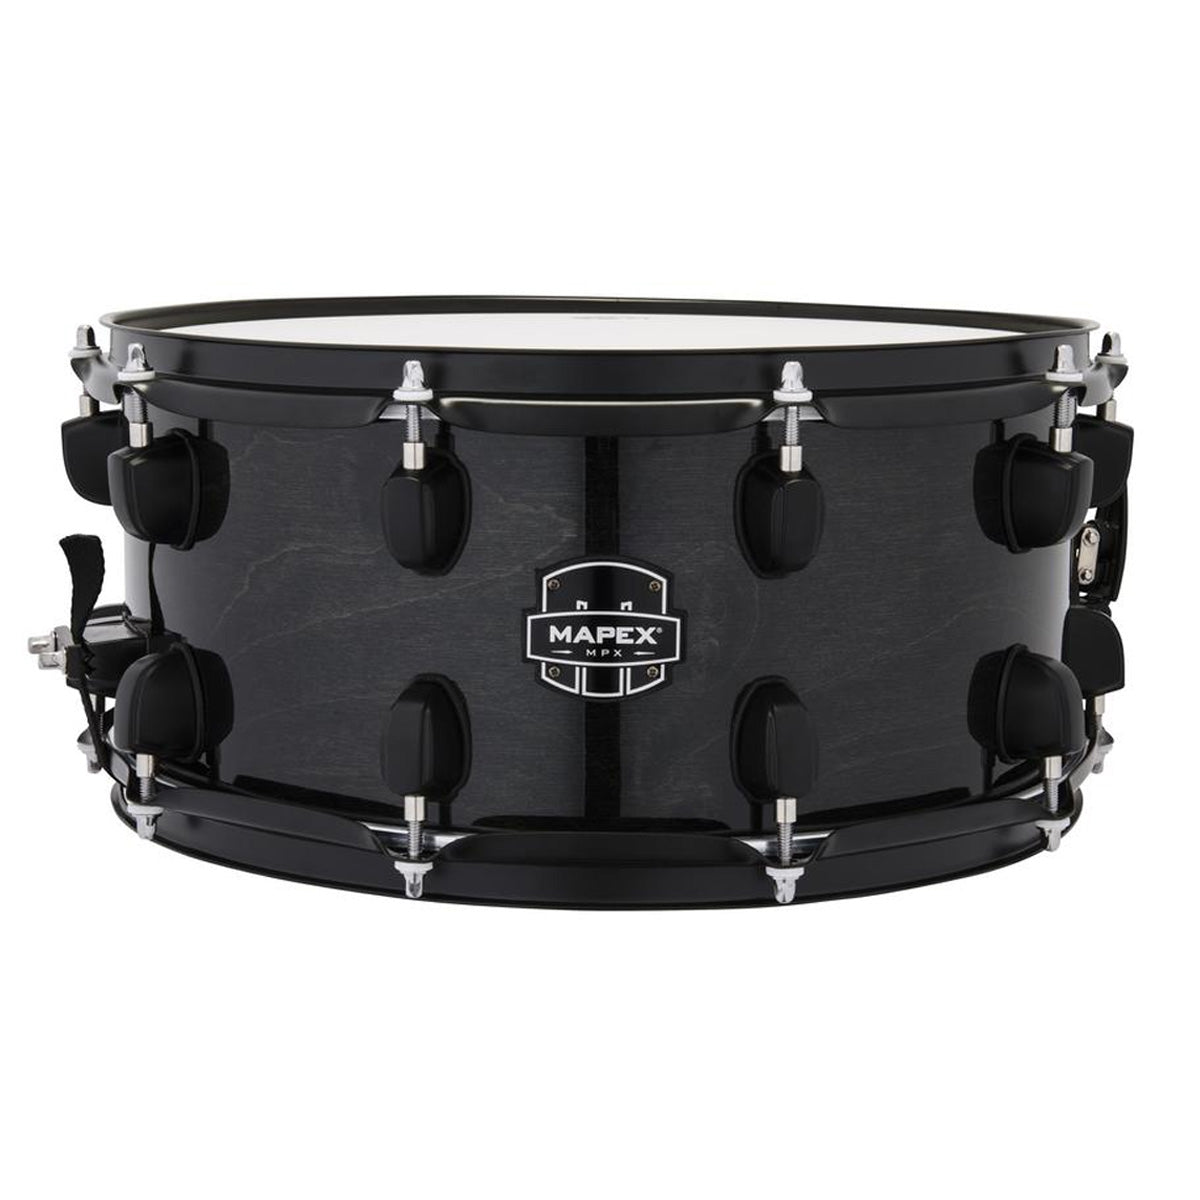 Mapex MPX 14"x6.5" Hybrid Shell Snare Drum in Black